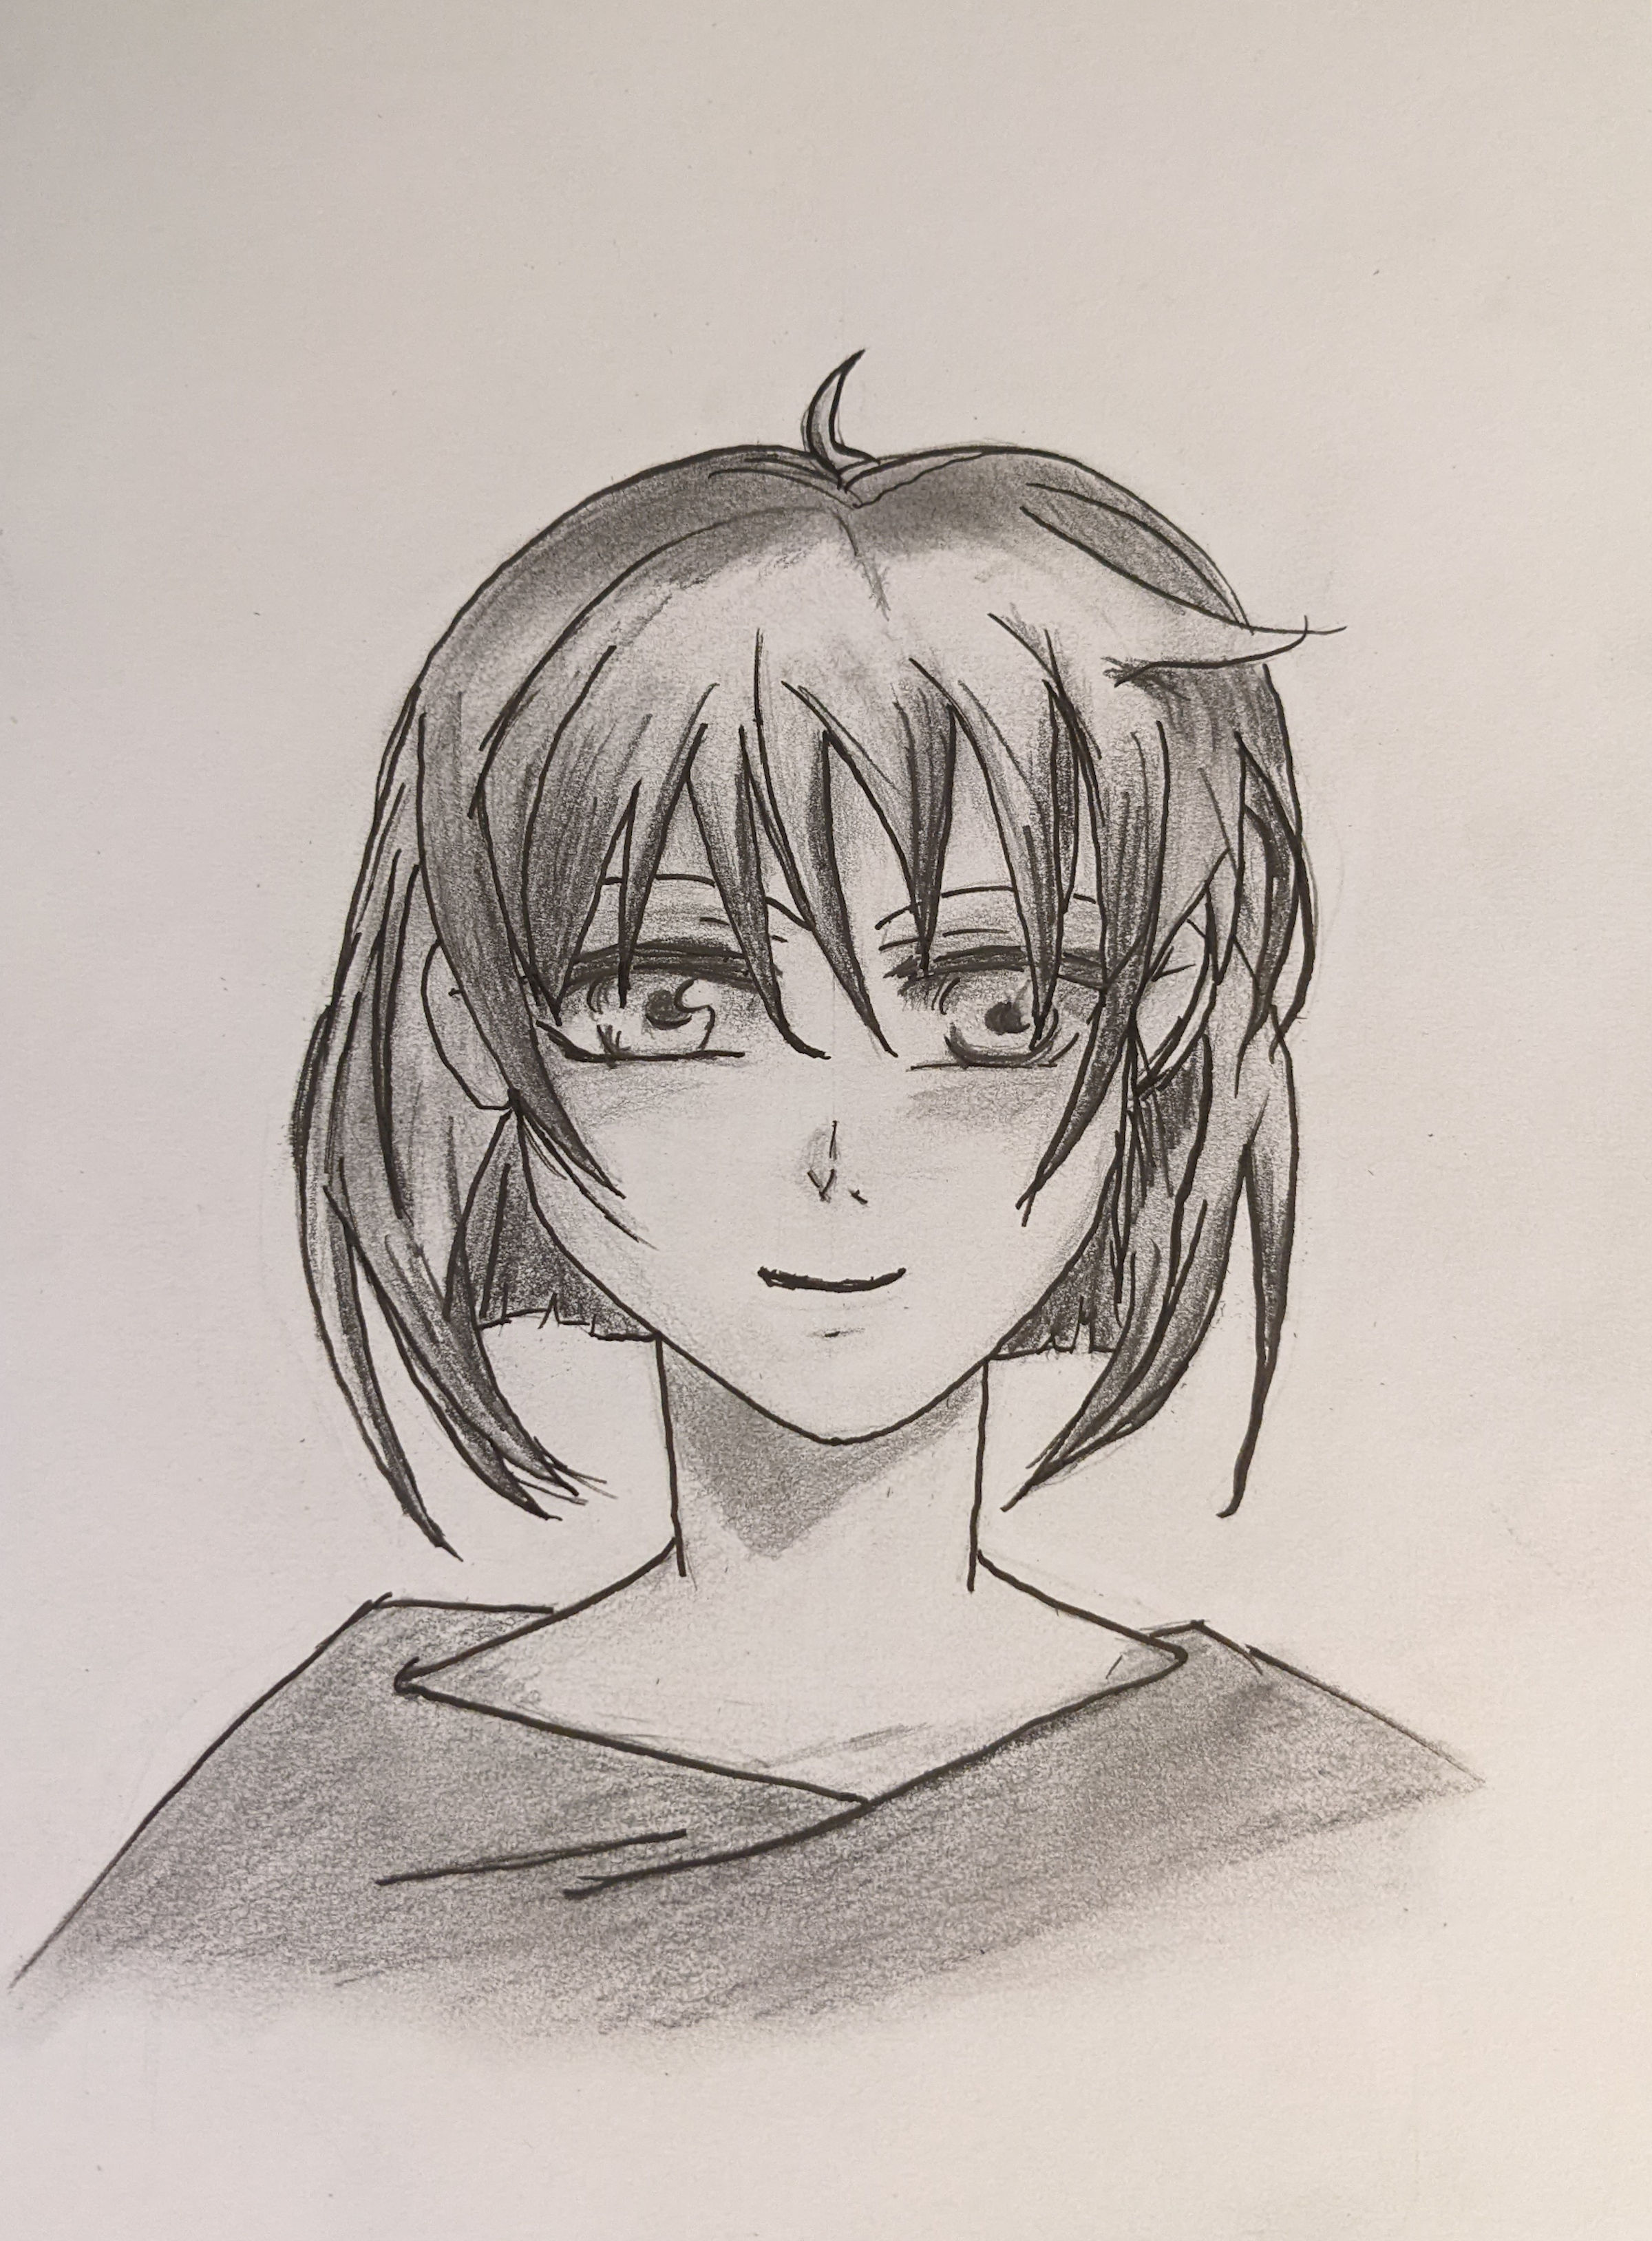 Young adult female manga character with short, dark hair.